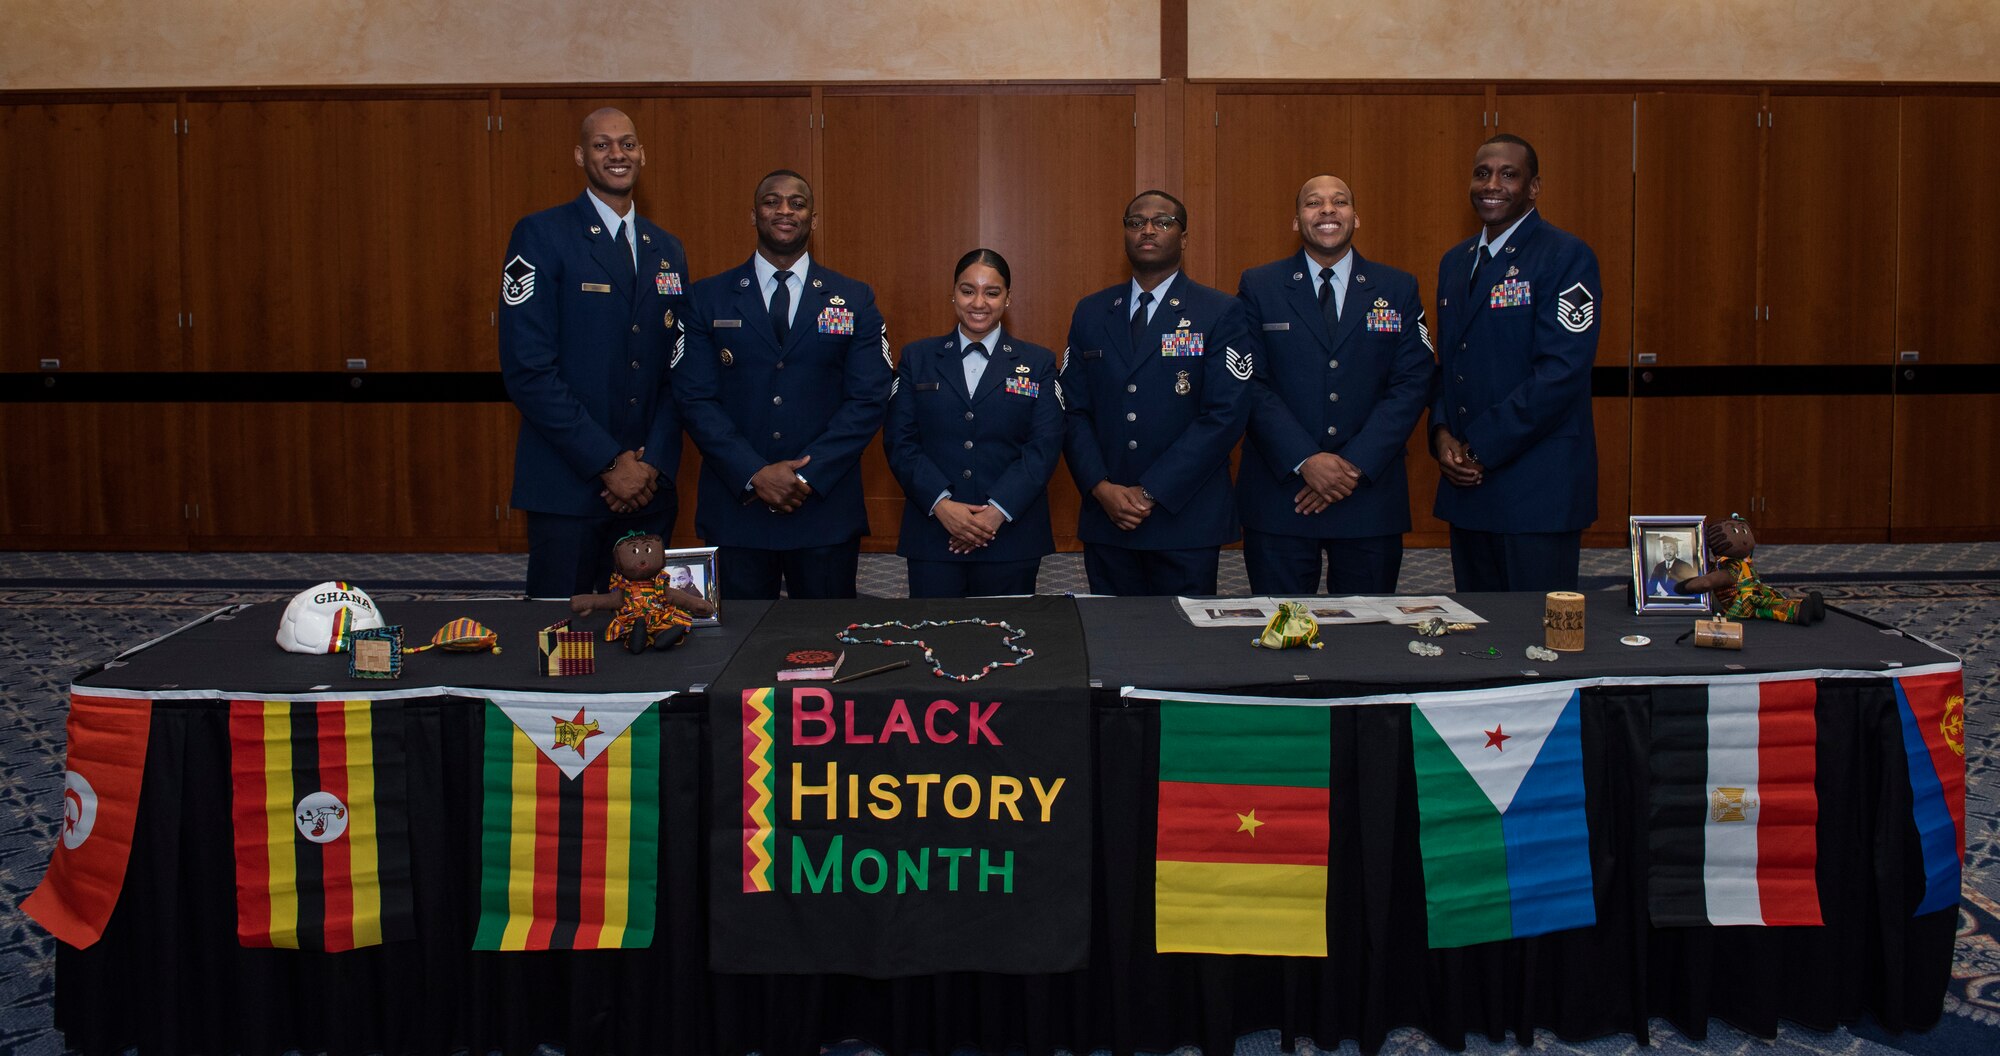 Members of the 52nd Fighter Wing African American Heritage Committee pose for a photo at the annual Black History Month Luncheon at Spangdahlem Air Base, Germany, Feb. 24, 2020. The committee organized a display of authentic cultural artifacts from various African heritages during the luncheon. (U.S. Air Force photo by Airman 1st Class Alison Stewart)